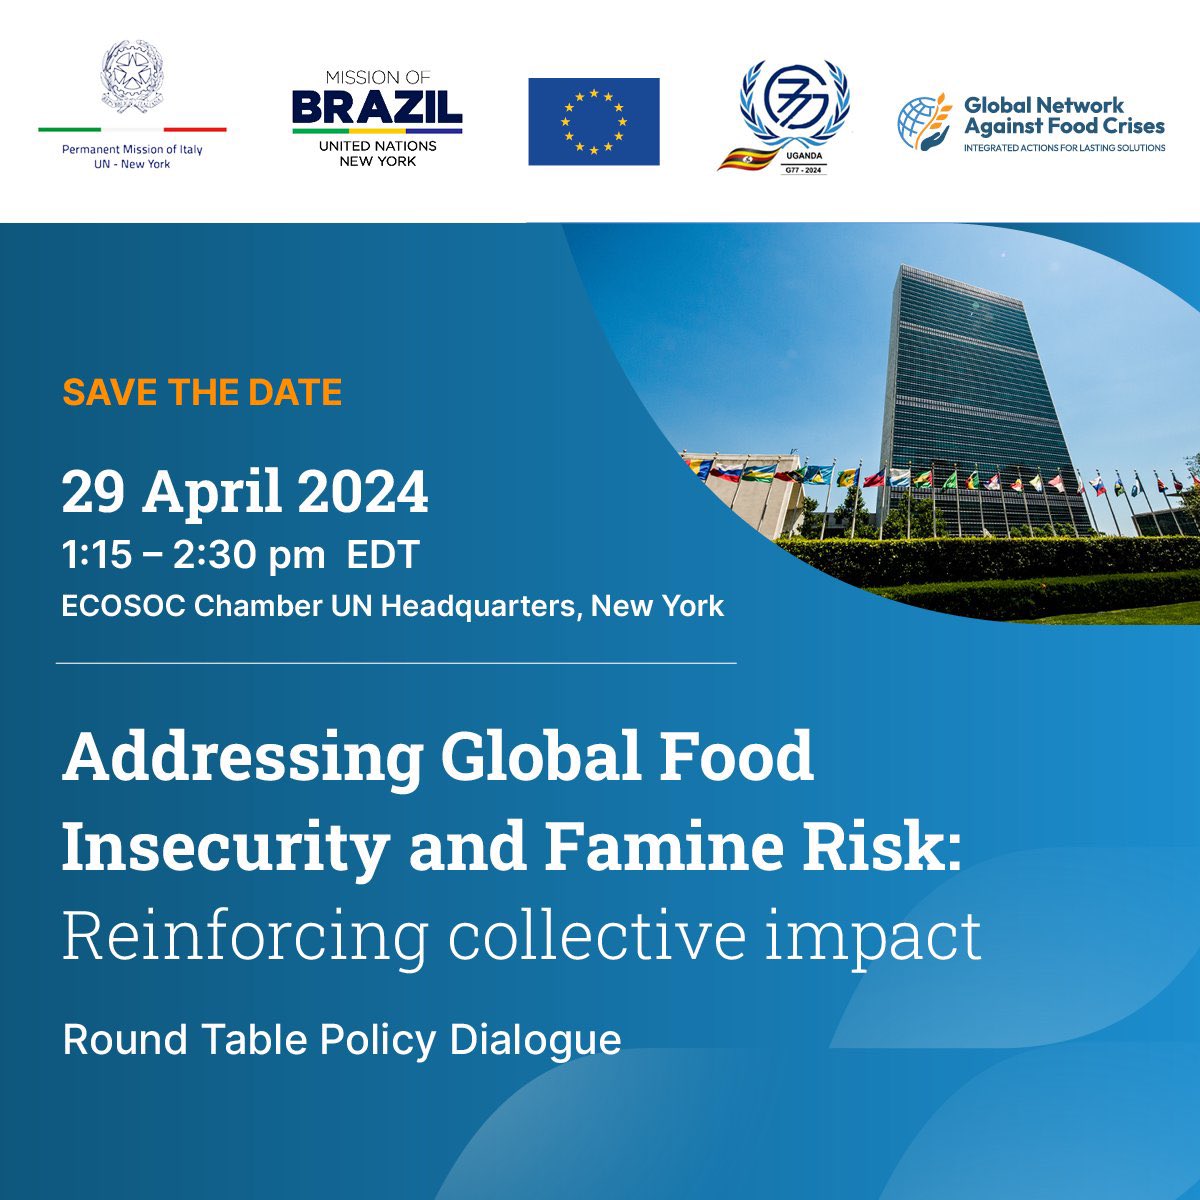 TODAY! ➡ 1:15-2:30 EDT at the @UN ECOSOC Chamber ➡ Addressing Global Food Insecurity and Famine Risk: Reinforcing collective impact - A Round Table Policy Dialogue Register in-person🔗bit.ly/3w7HbE3 INFO🔗bit.ly/3UwPh2t UN Web 📺 bit.ly/3wcQy5z